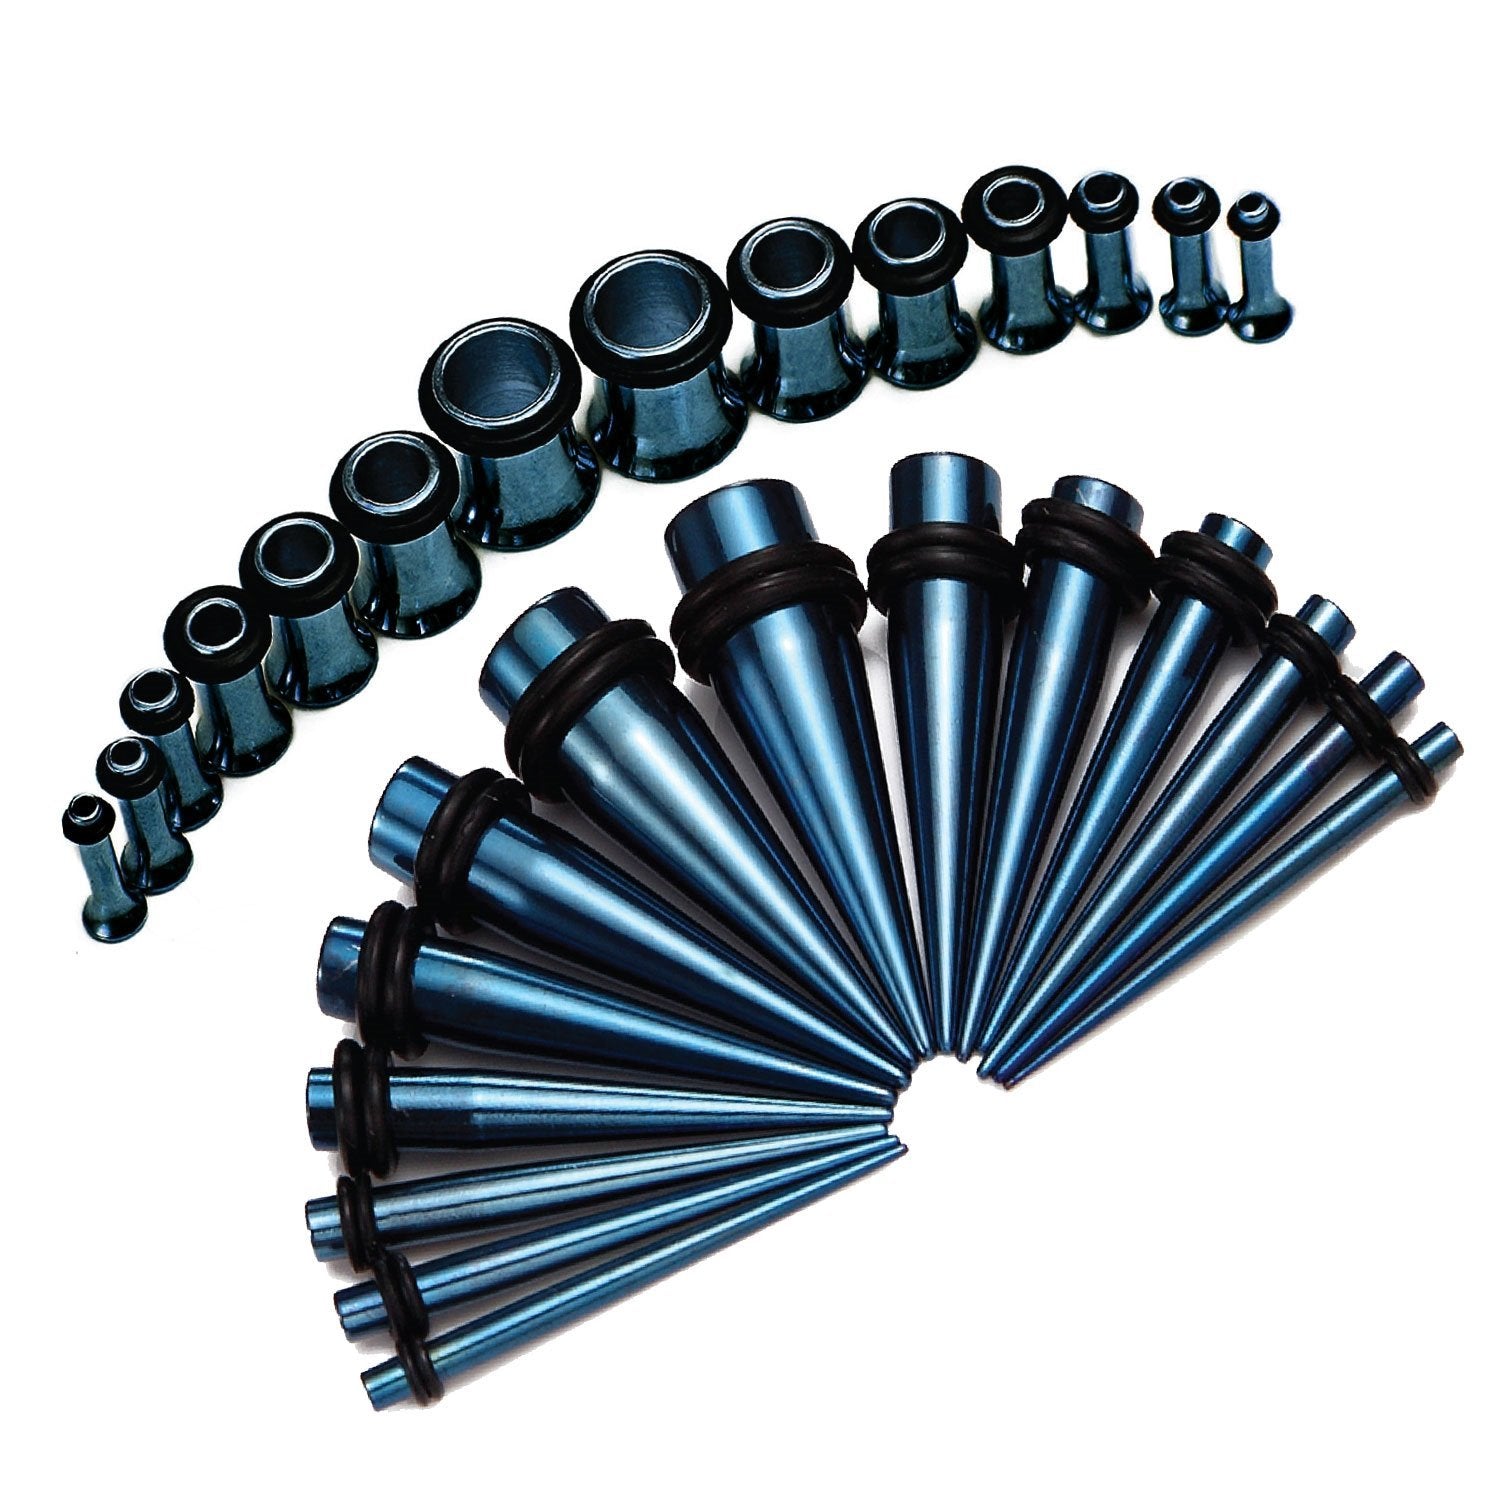 28PC Gauges Kit Ear Stretching 12G-0G Surgical Steel Tunnel Plugs